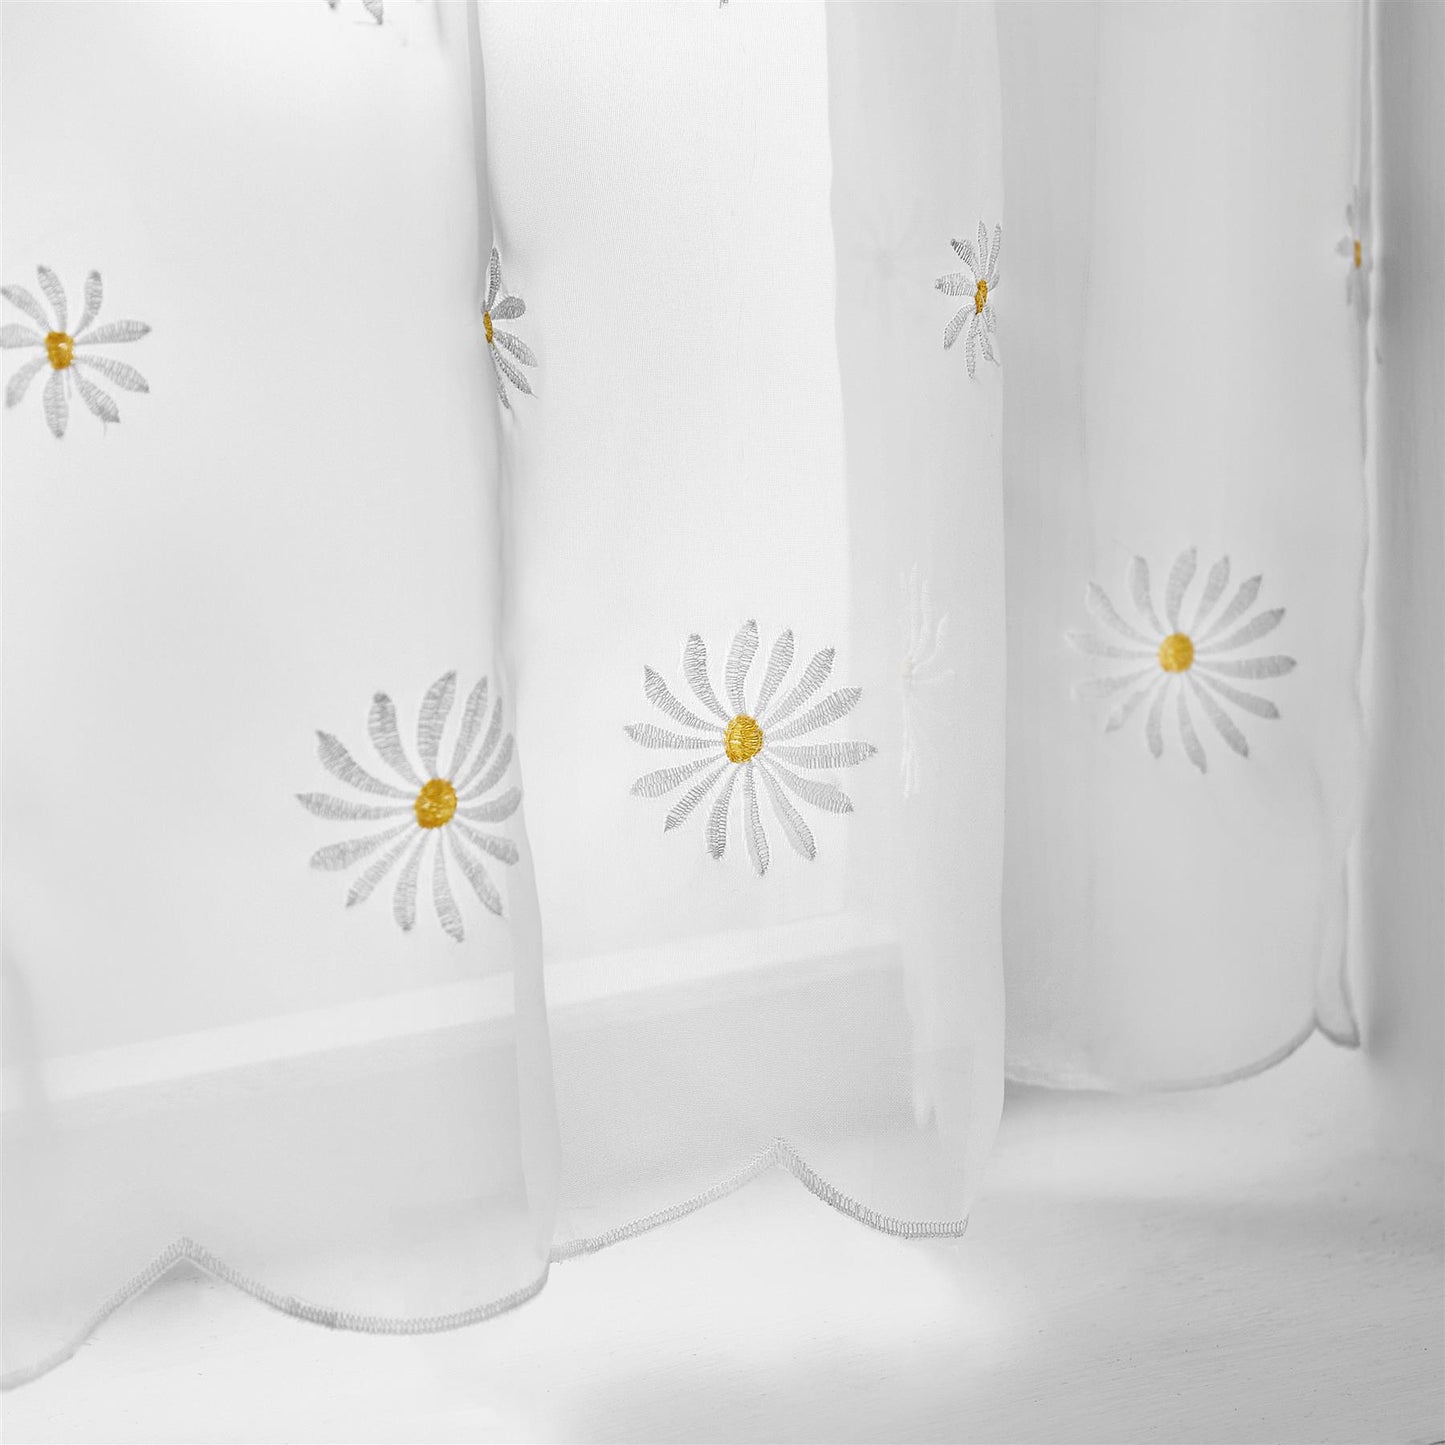 White/Multi Daisies cafe curtain panel